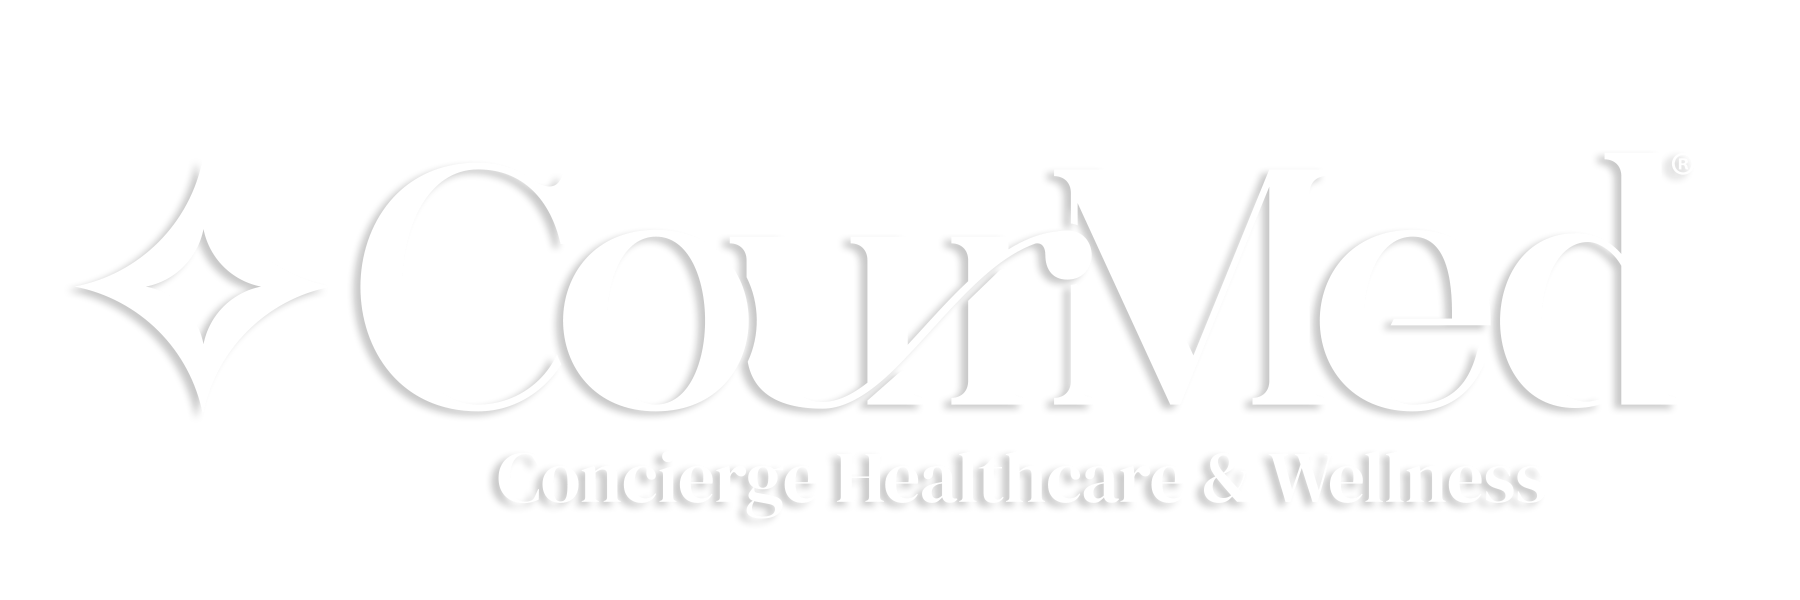 CourMed Concierge Healthcare & Wellness Solutions